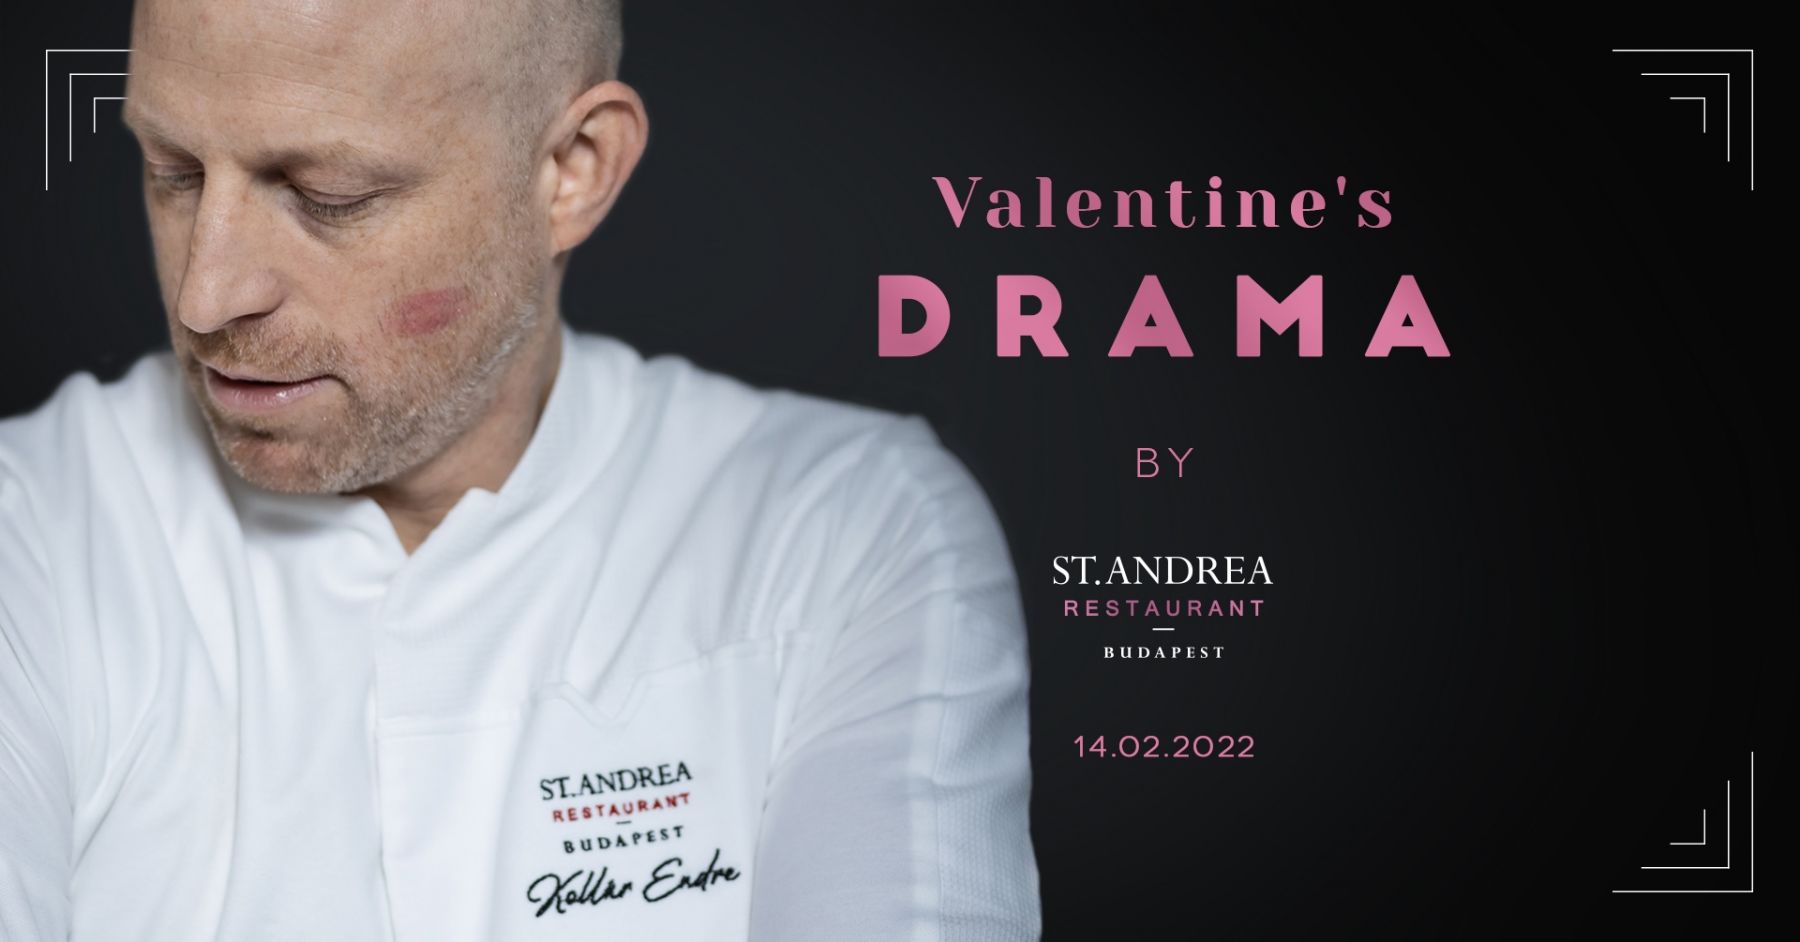 Valentine's DRAMA by St. Andrea Restaurant